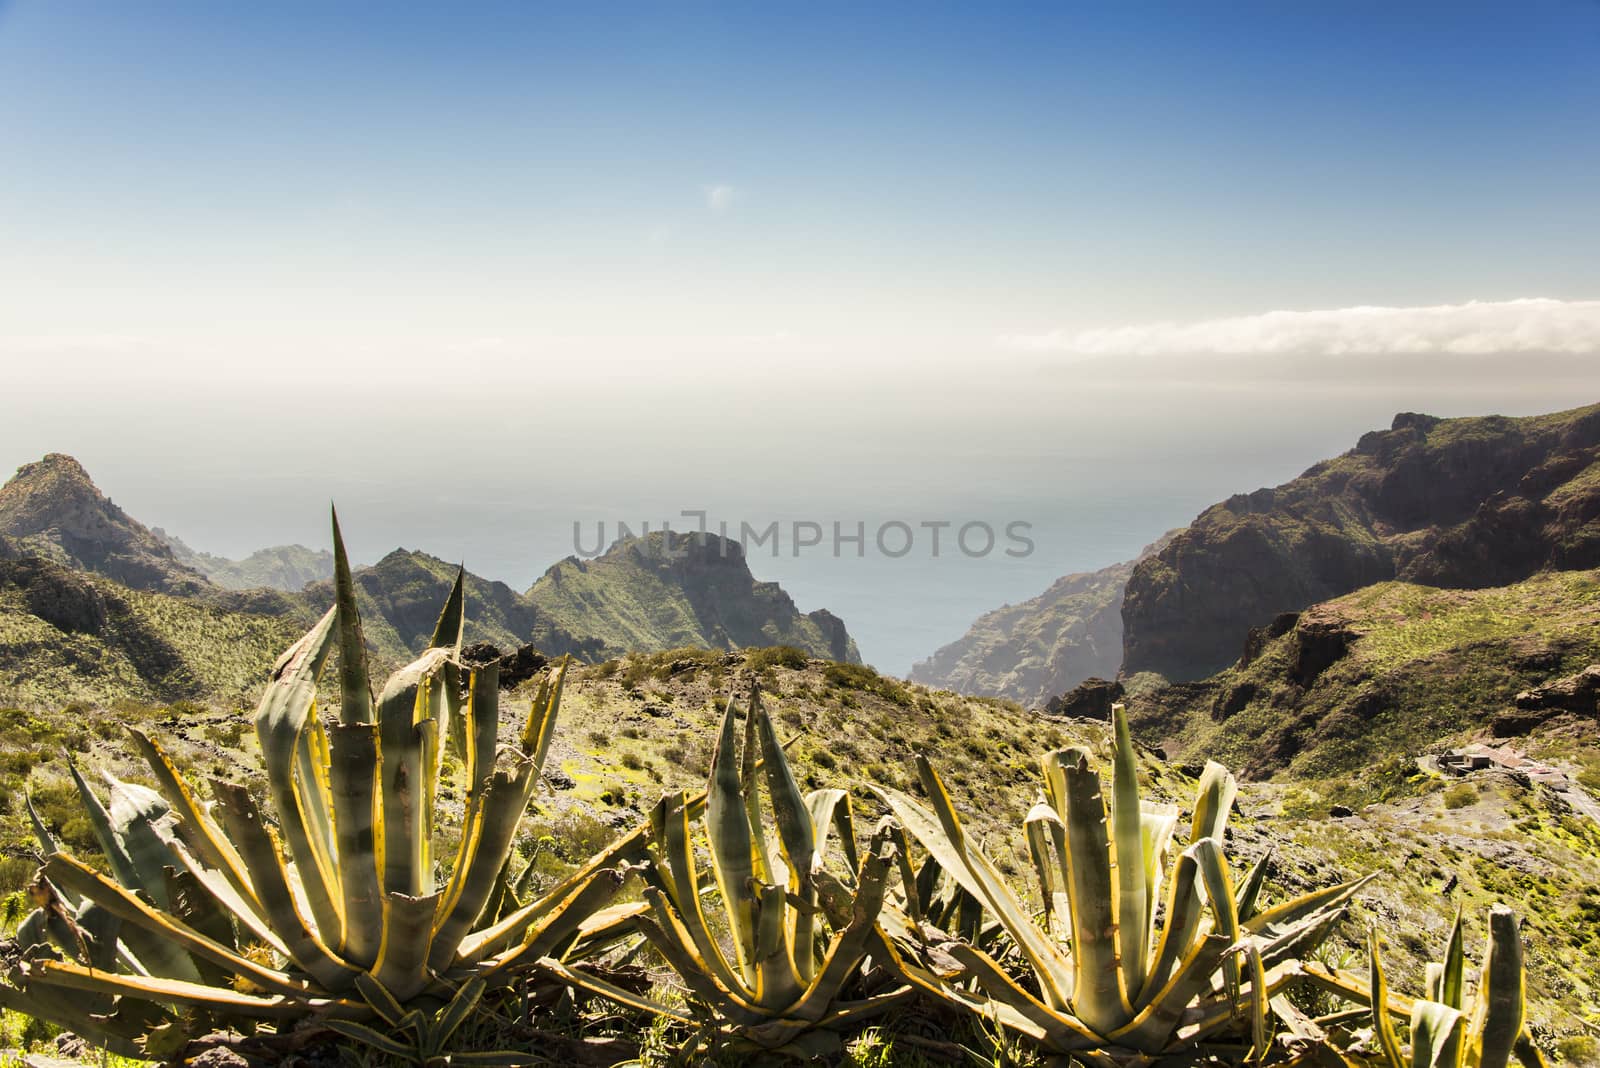 Landscape from Tenerife, Canary Island with Aloe vera plants in the foreground and mountains and ocean view.